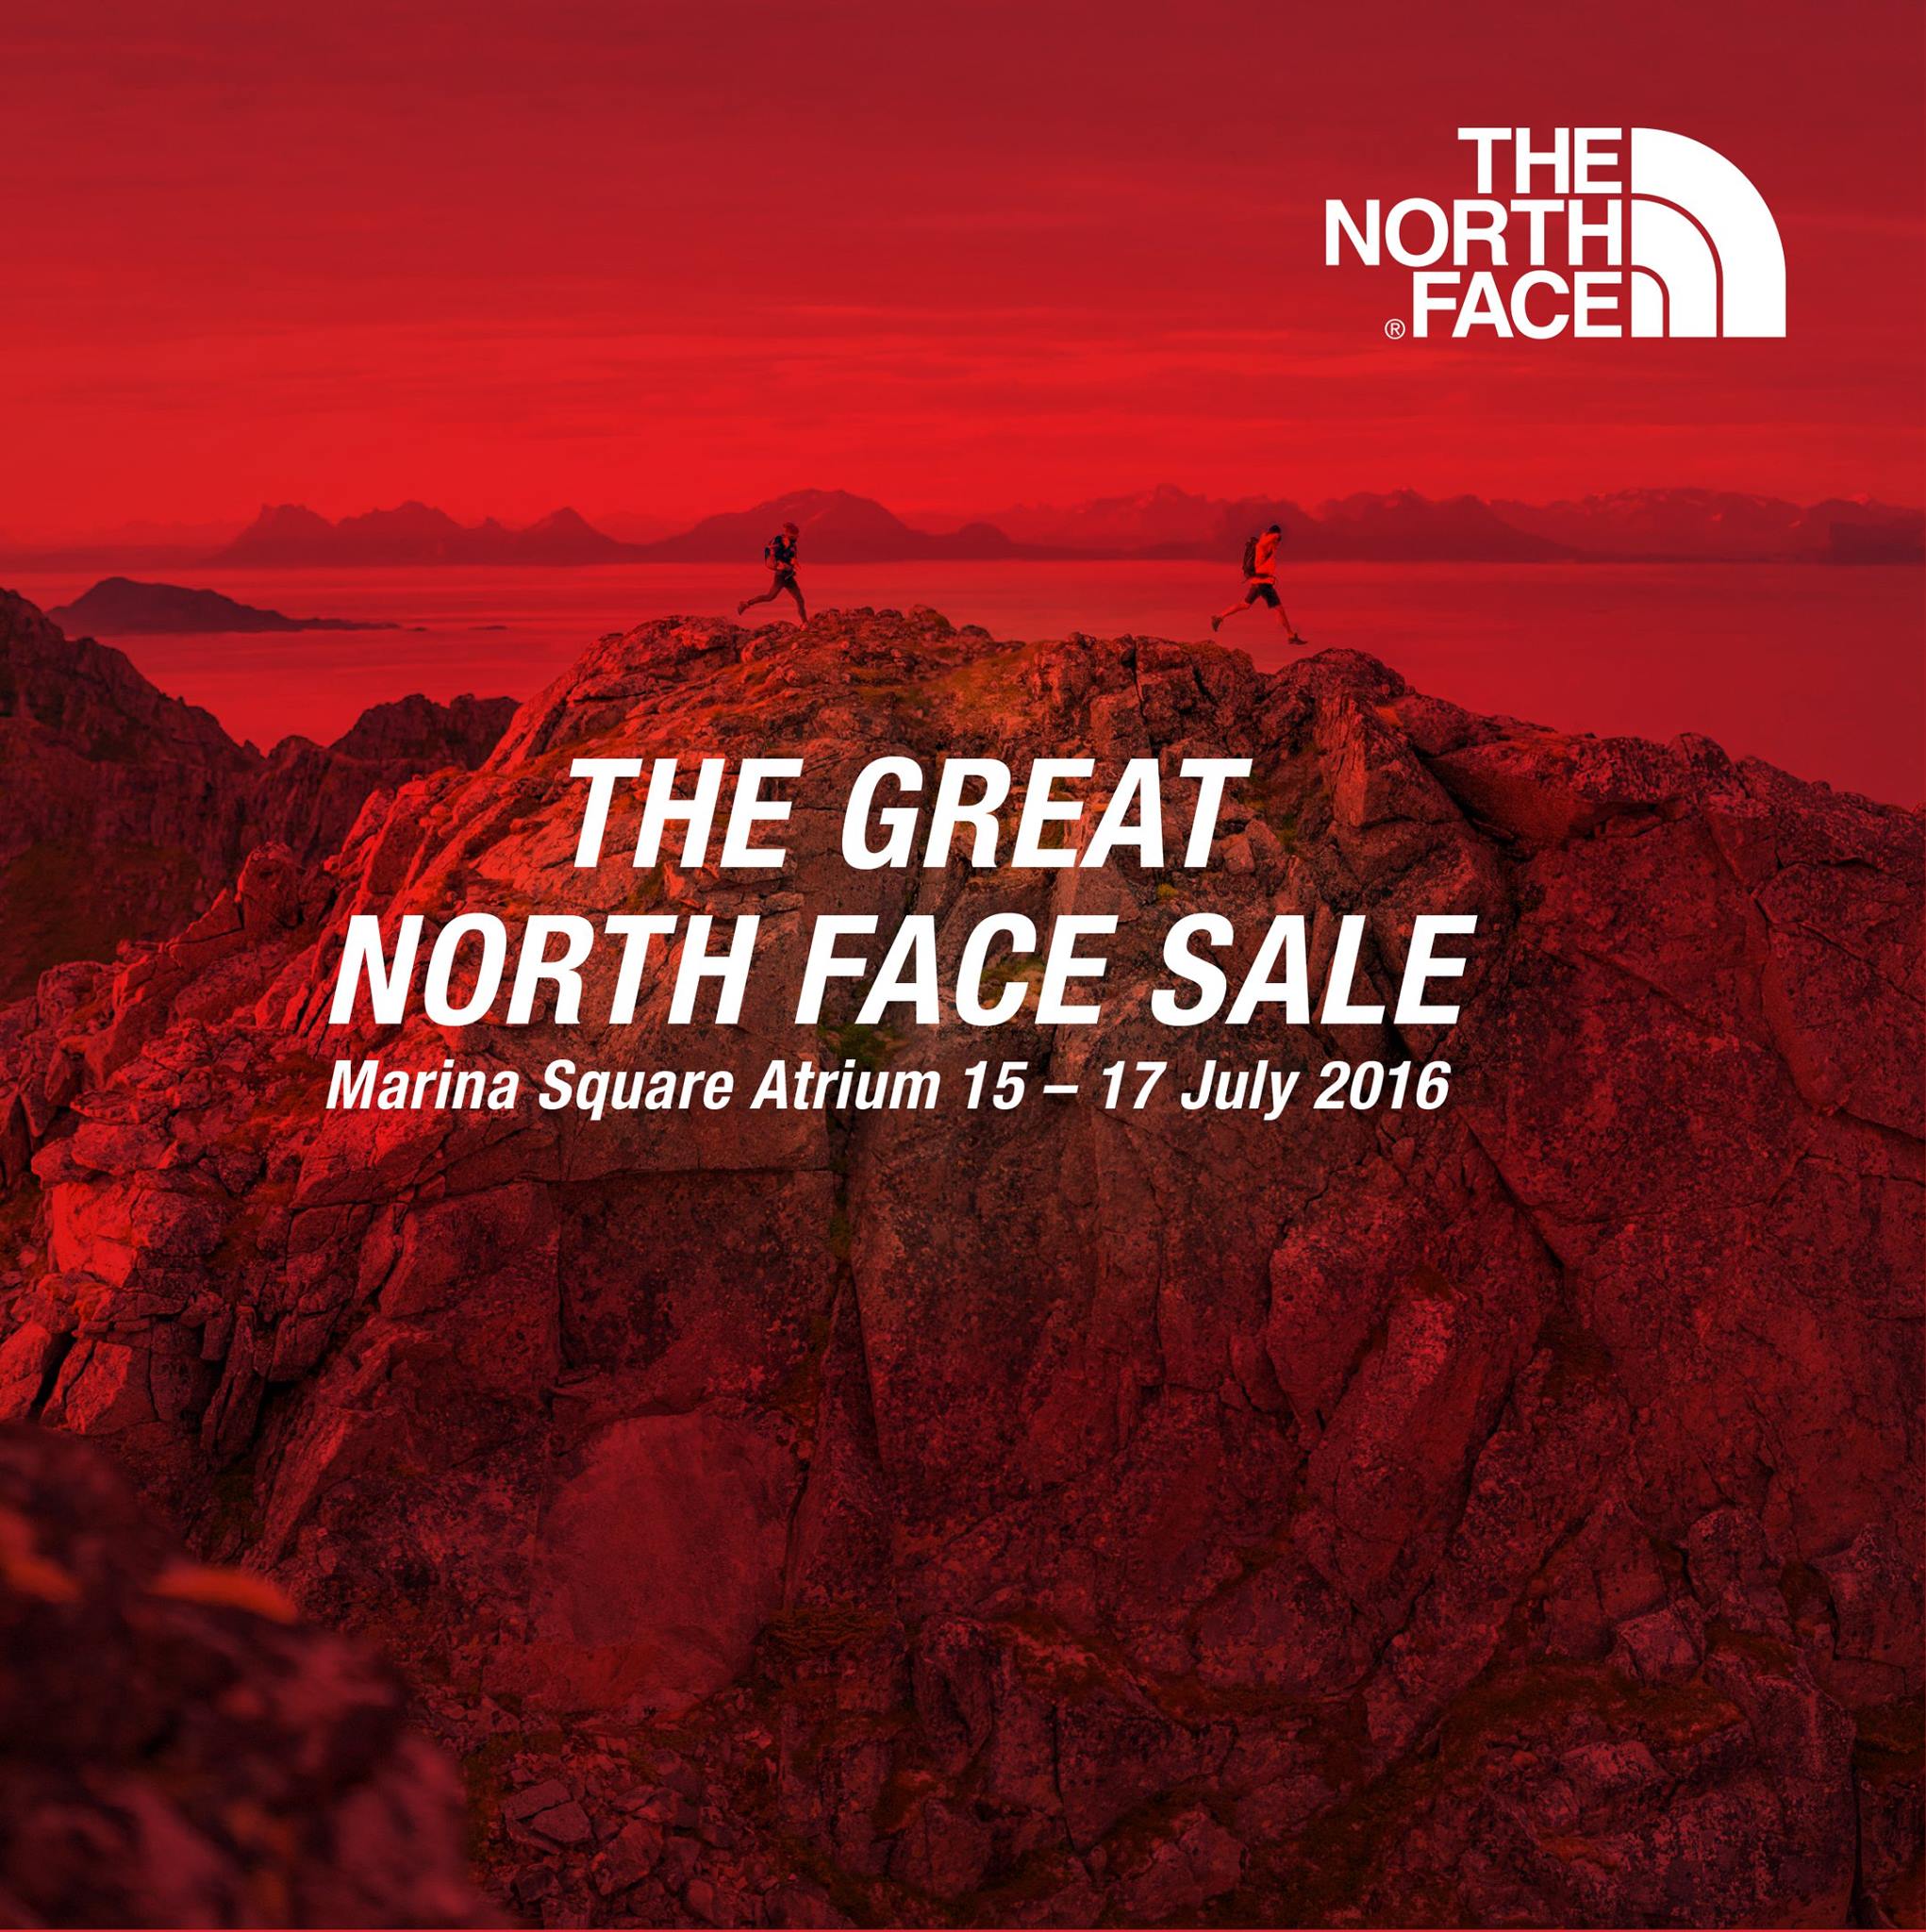 The Great North Face Sale Singapore Promotion 15 to 17 Jul 2016